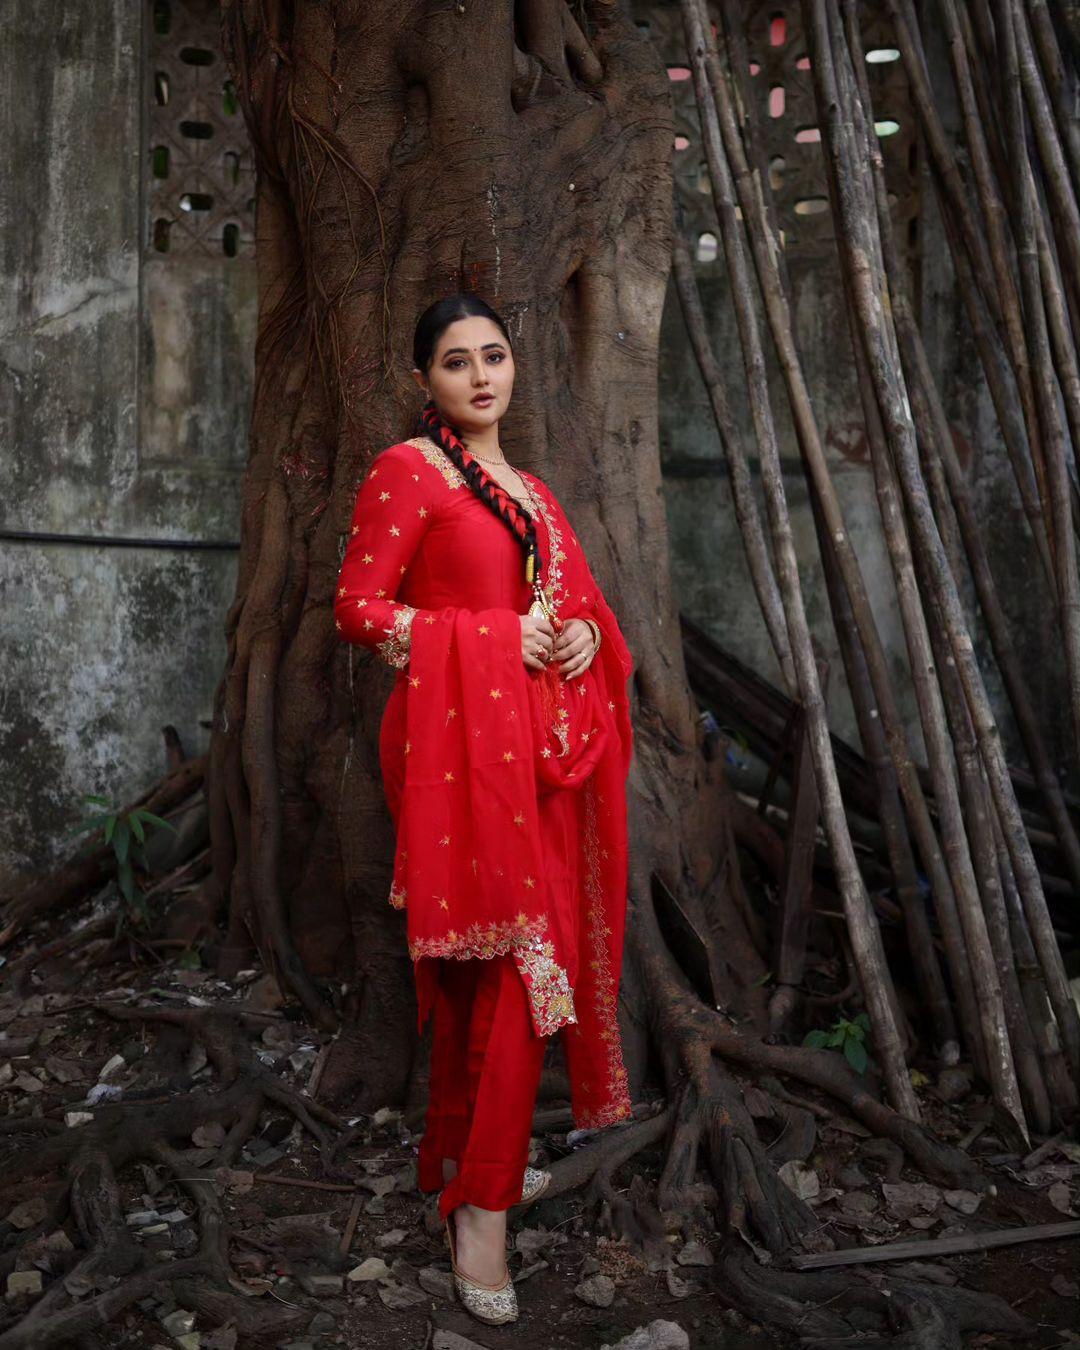 In this traditional appearance, Rashami Desai captivates in a red kurta paired with matching pants and a dupatta. The beautiful intricate designs on the suit add a touch of sophistication. Tying her hair in braids imparts a unique and charming aspect to the overall look